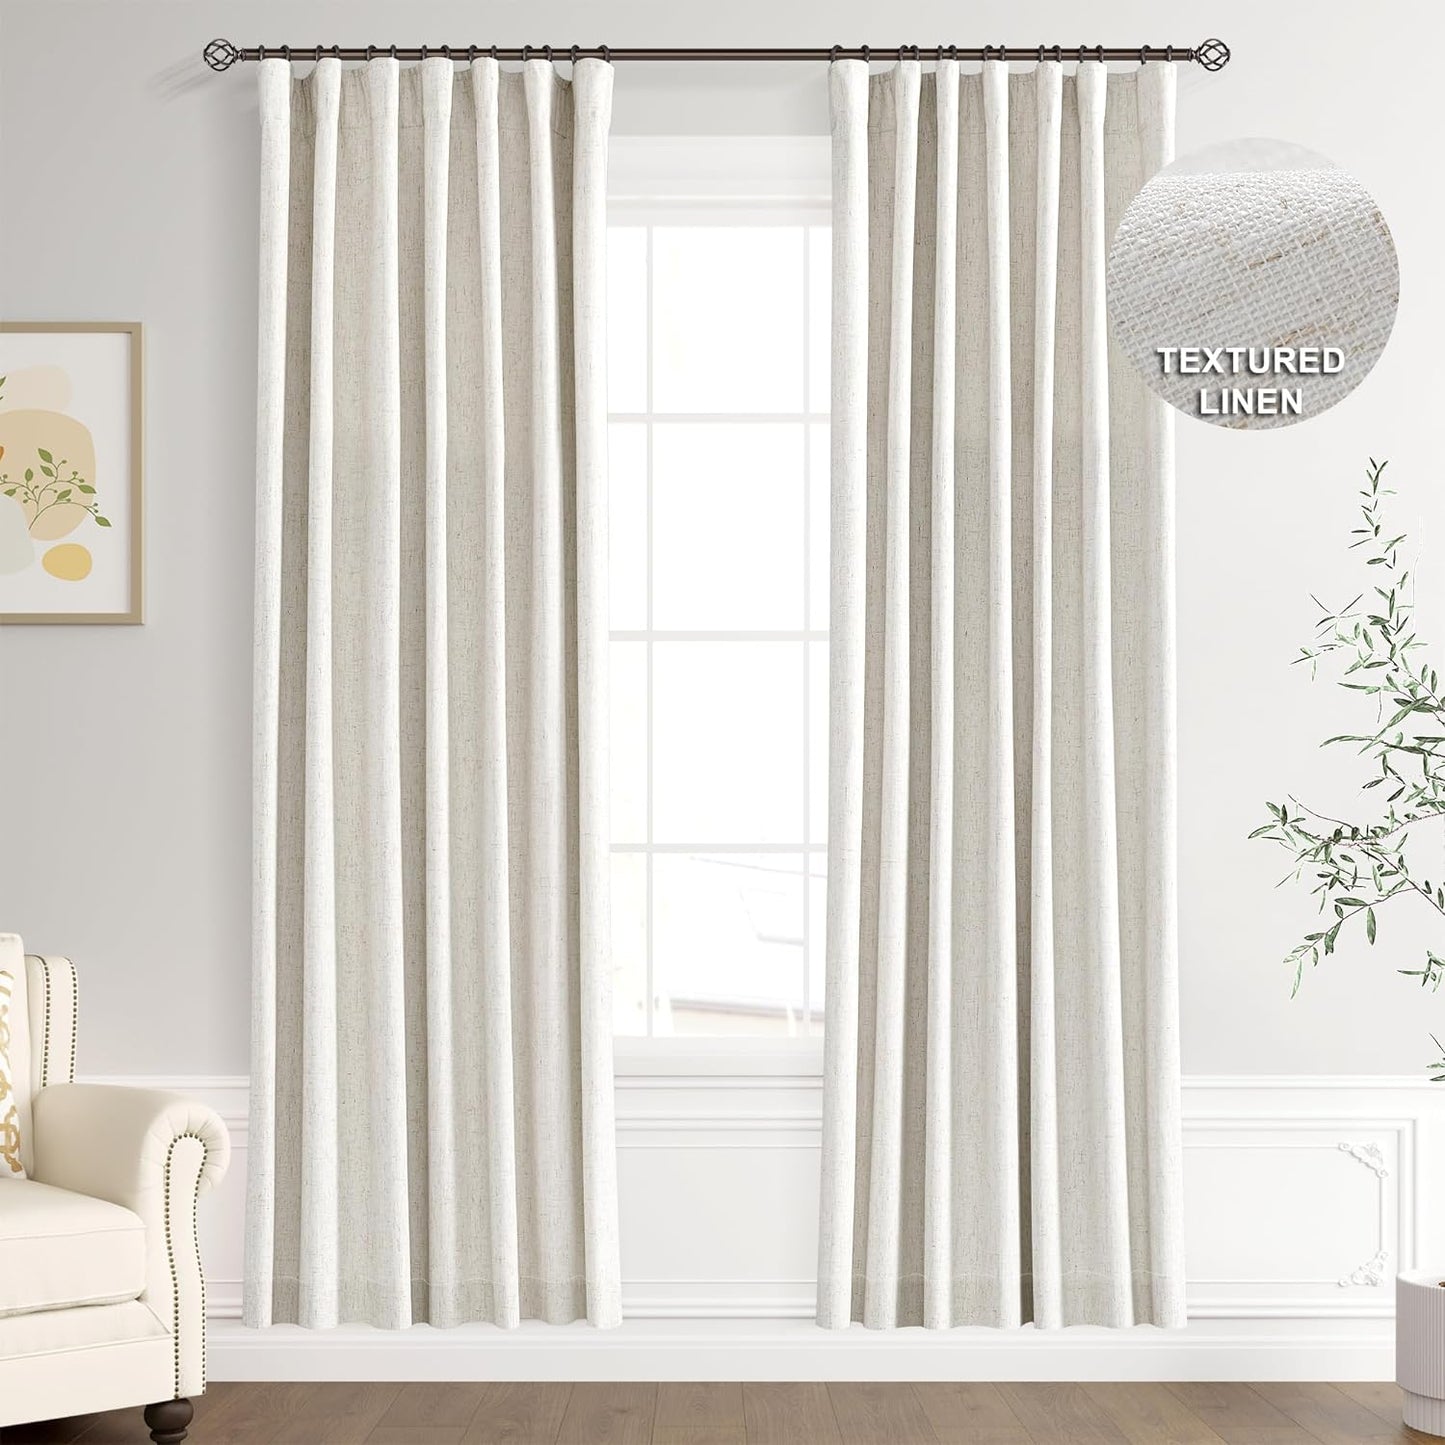 Joywell 100% Blackout Linen Curtains 102 Inches Long, Rod Pocket/Back Tab/Hook Belt/Clip Rings, Thermal Insulated Floor Length Drapes for Bedroom Dining Living Room(2 Panels,W52 X L102,Linen)  Joywell Natural Beige 52W X 78L Inch X 2 Panels 